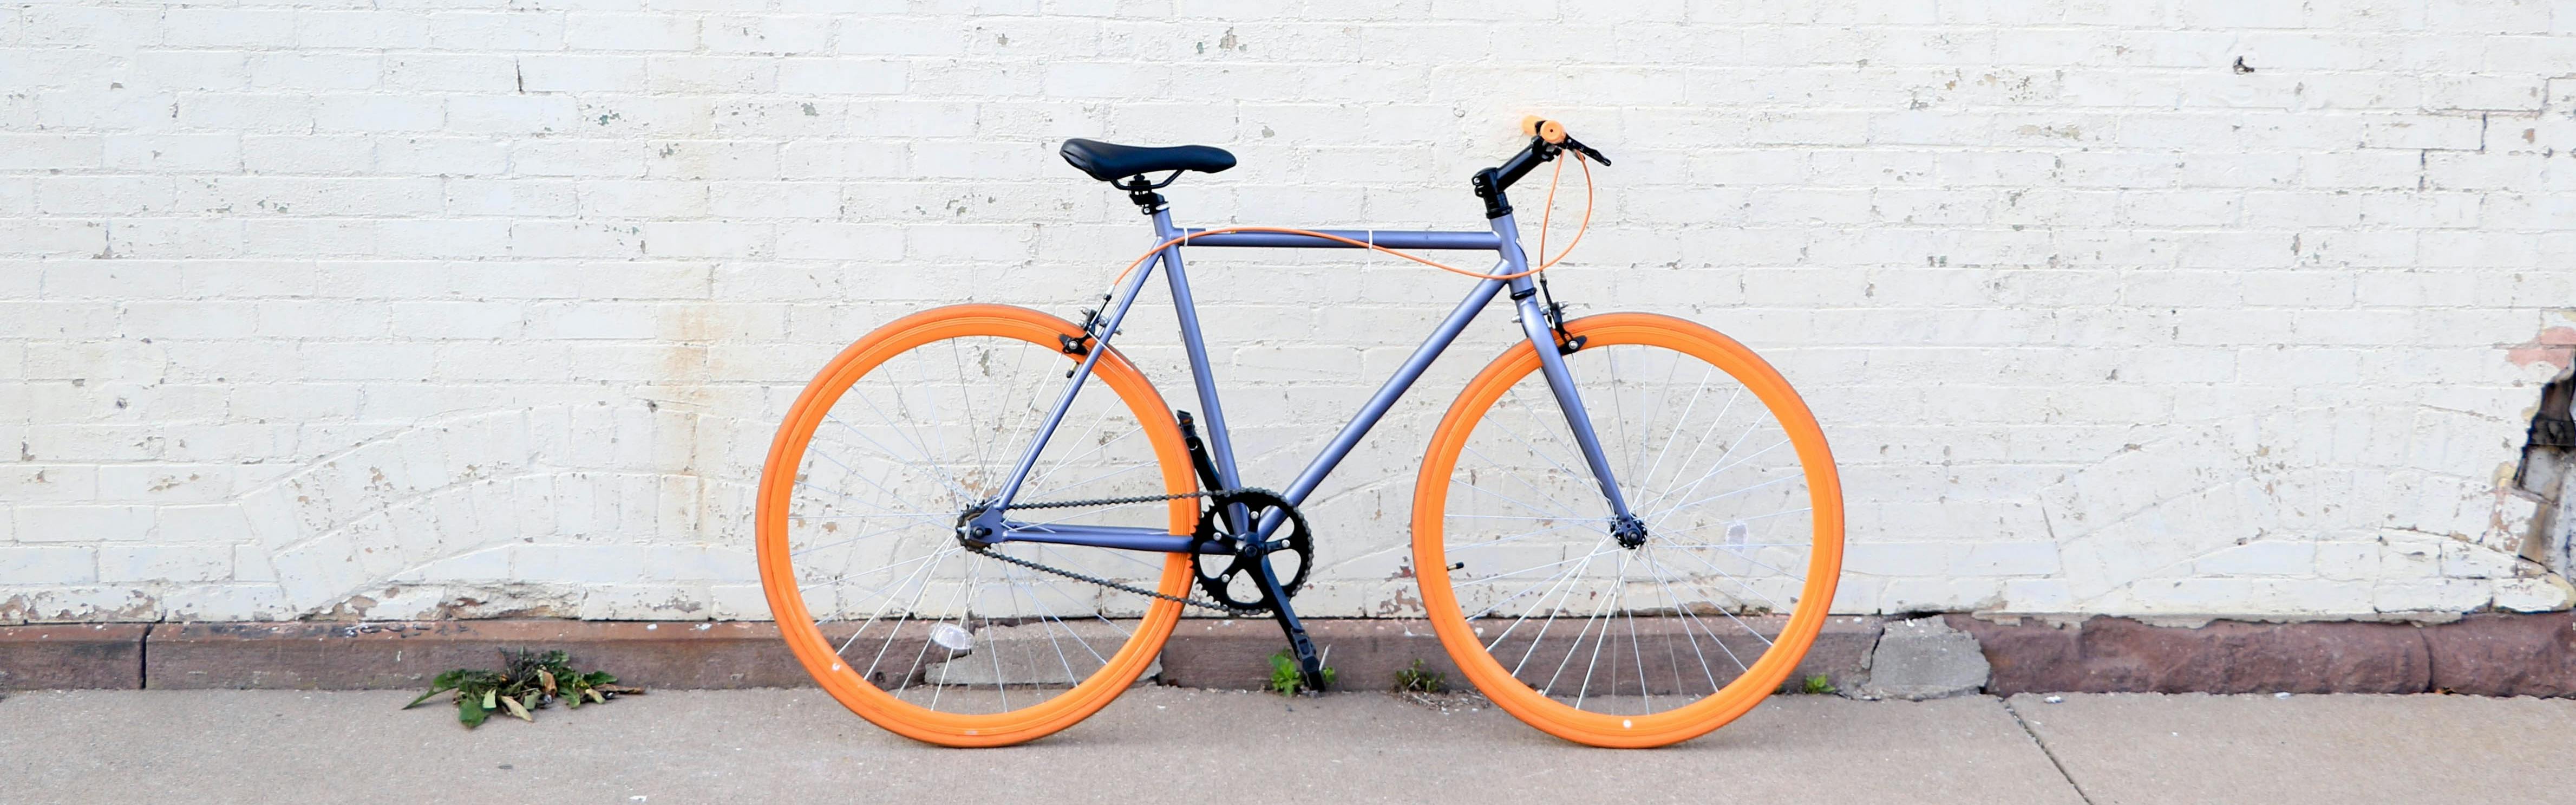 A purple bike with vibrant orange tires standing on the sidewalk against a blank white wall.